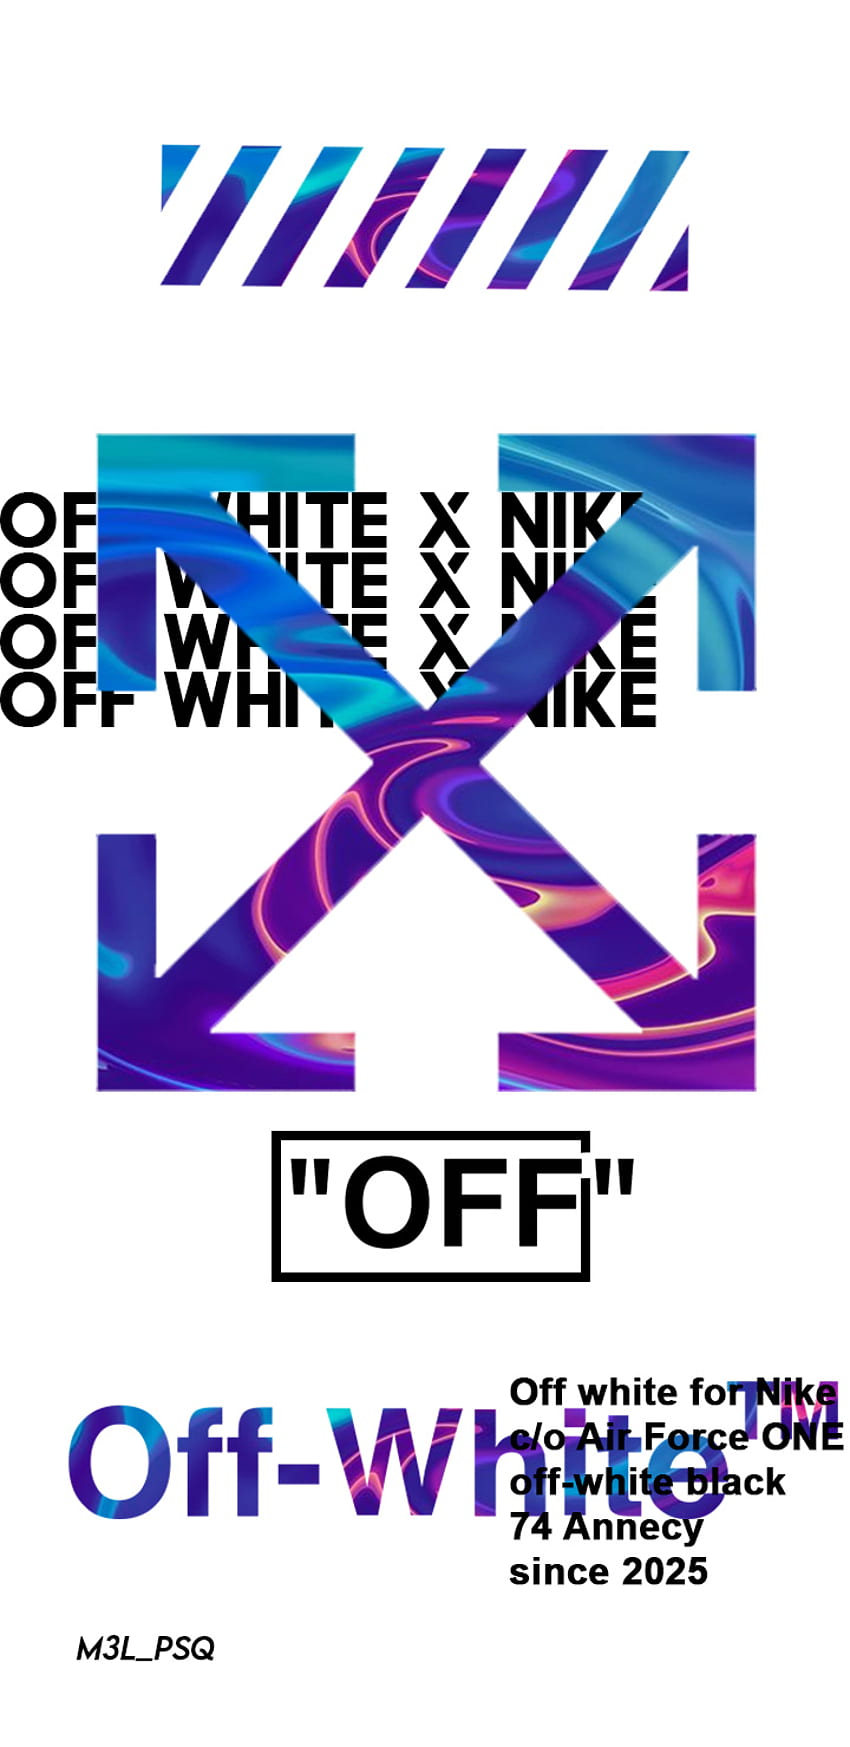 Off-white, Force, nike, One, Air, shoes, streetwear, off, White, street ...